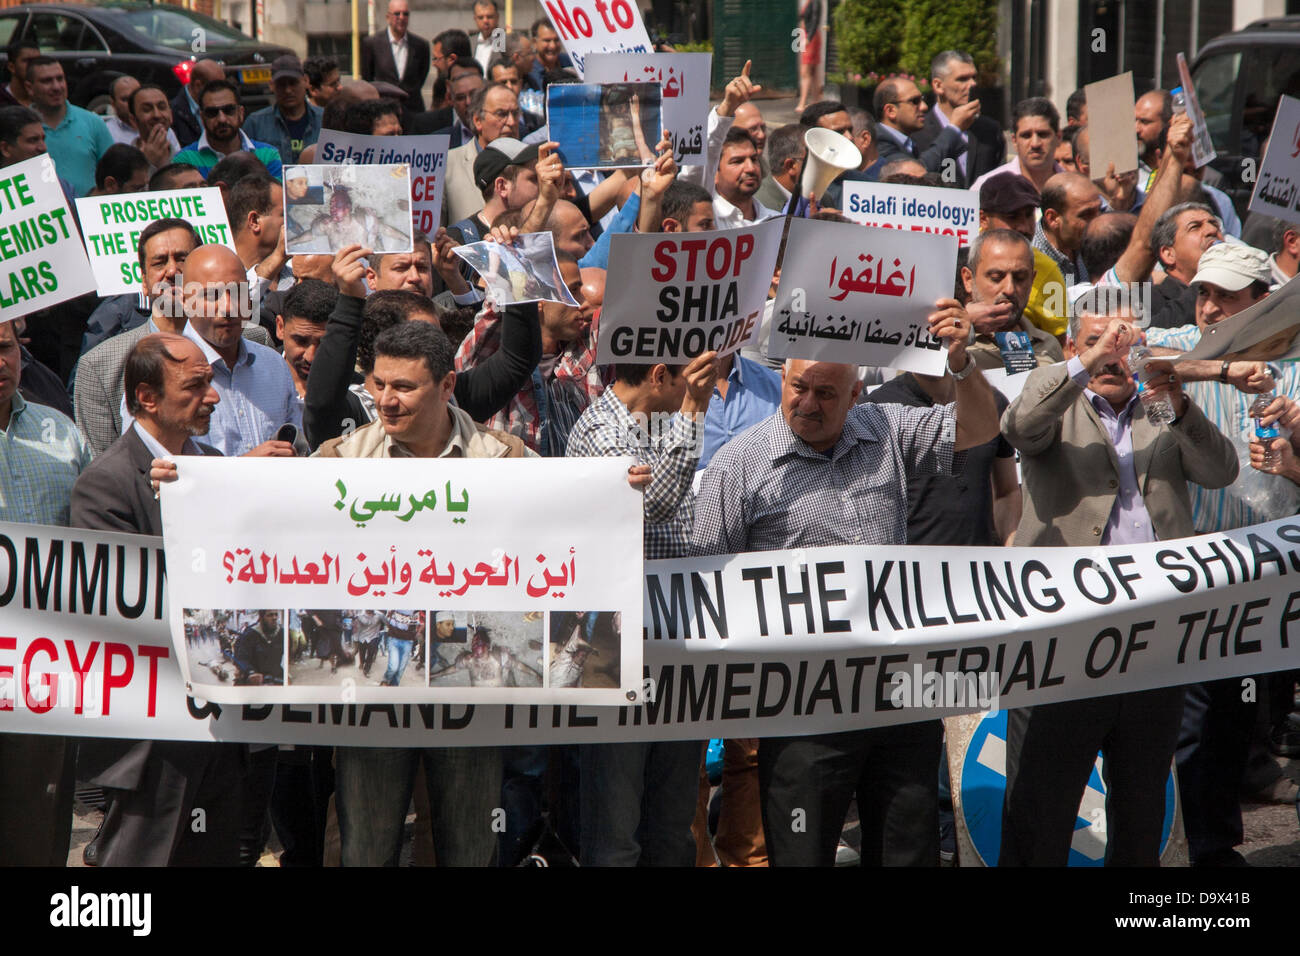 London, UK. 27th June 2013. Part of the crowd of around 200 demonstrators as Egyptians in London protest against sectarian killings in Egypt. Credit:  Paul Davey/Alamy Live News Stock Photo